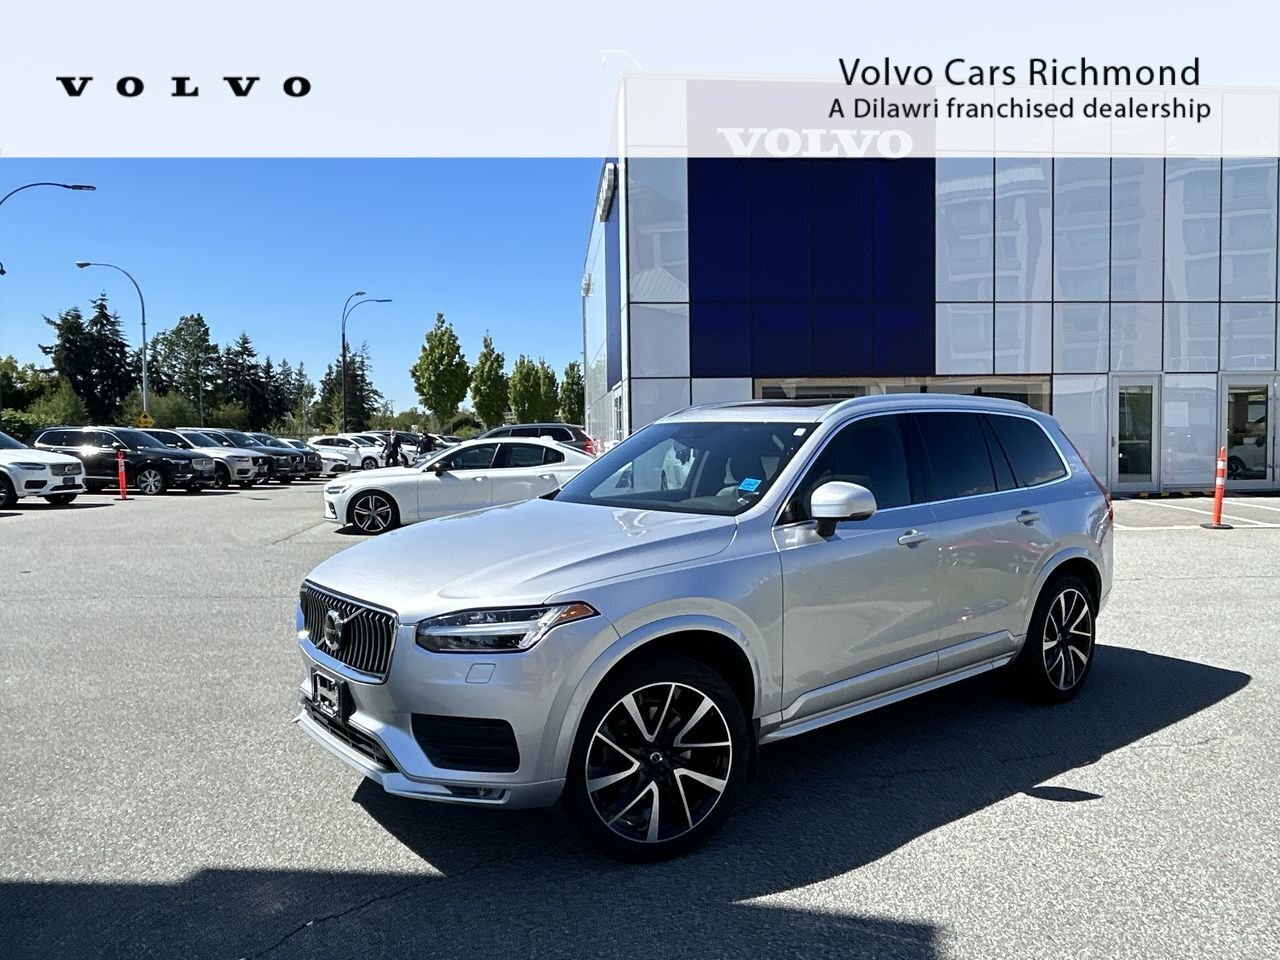 2020 Volvo XC90 T6 AWD Momentum (6-Seat) | Finance from 3.24% OAC 